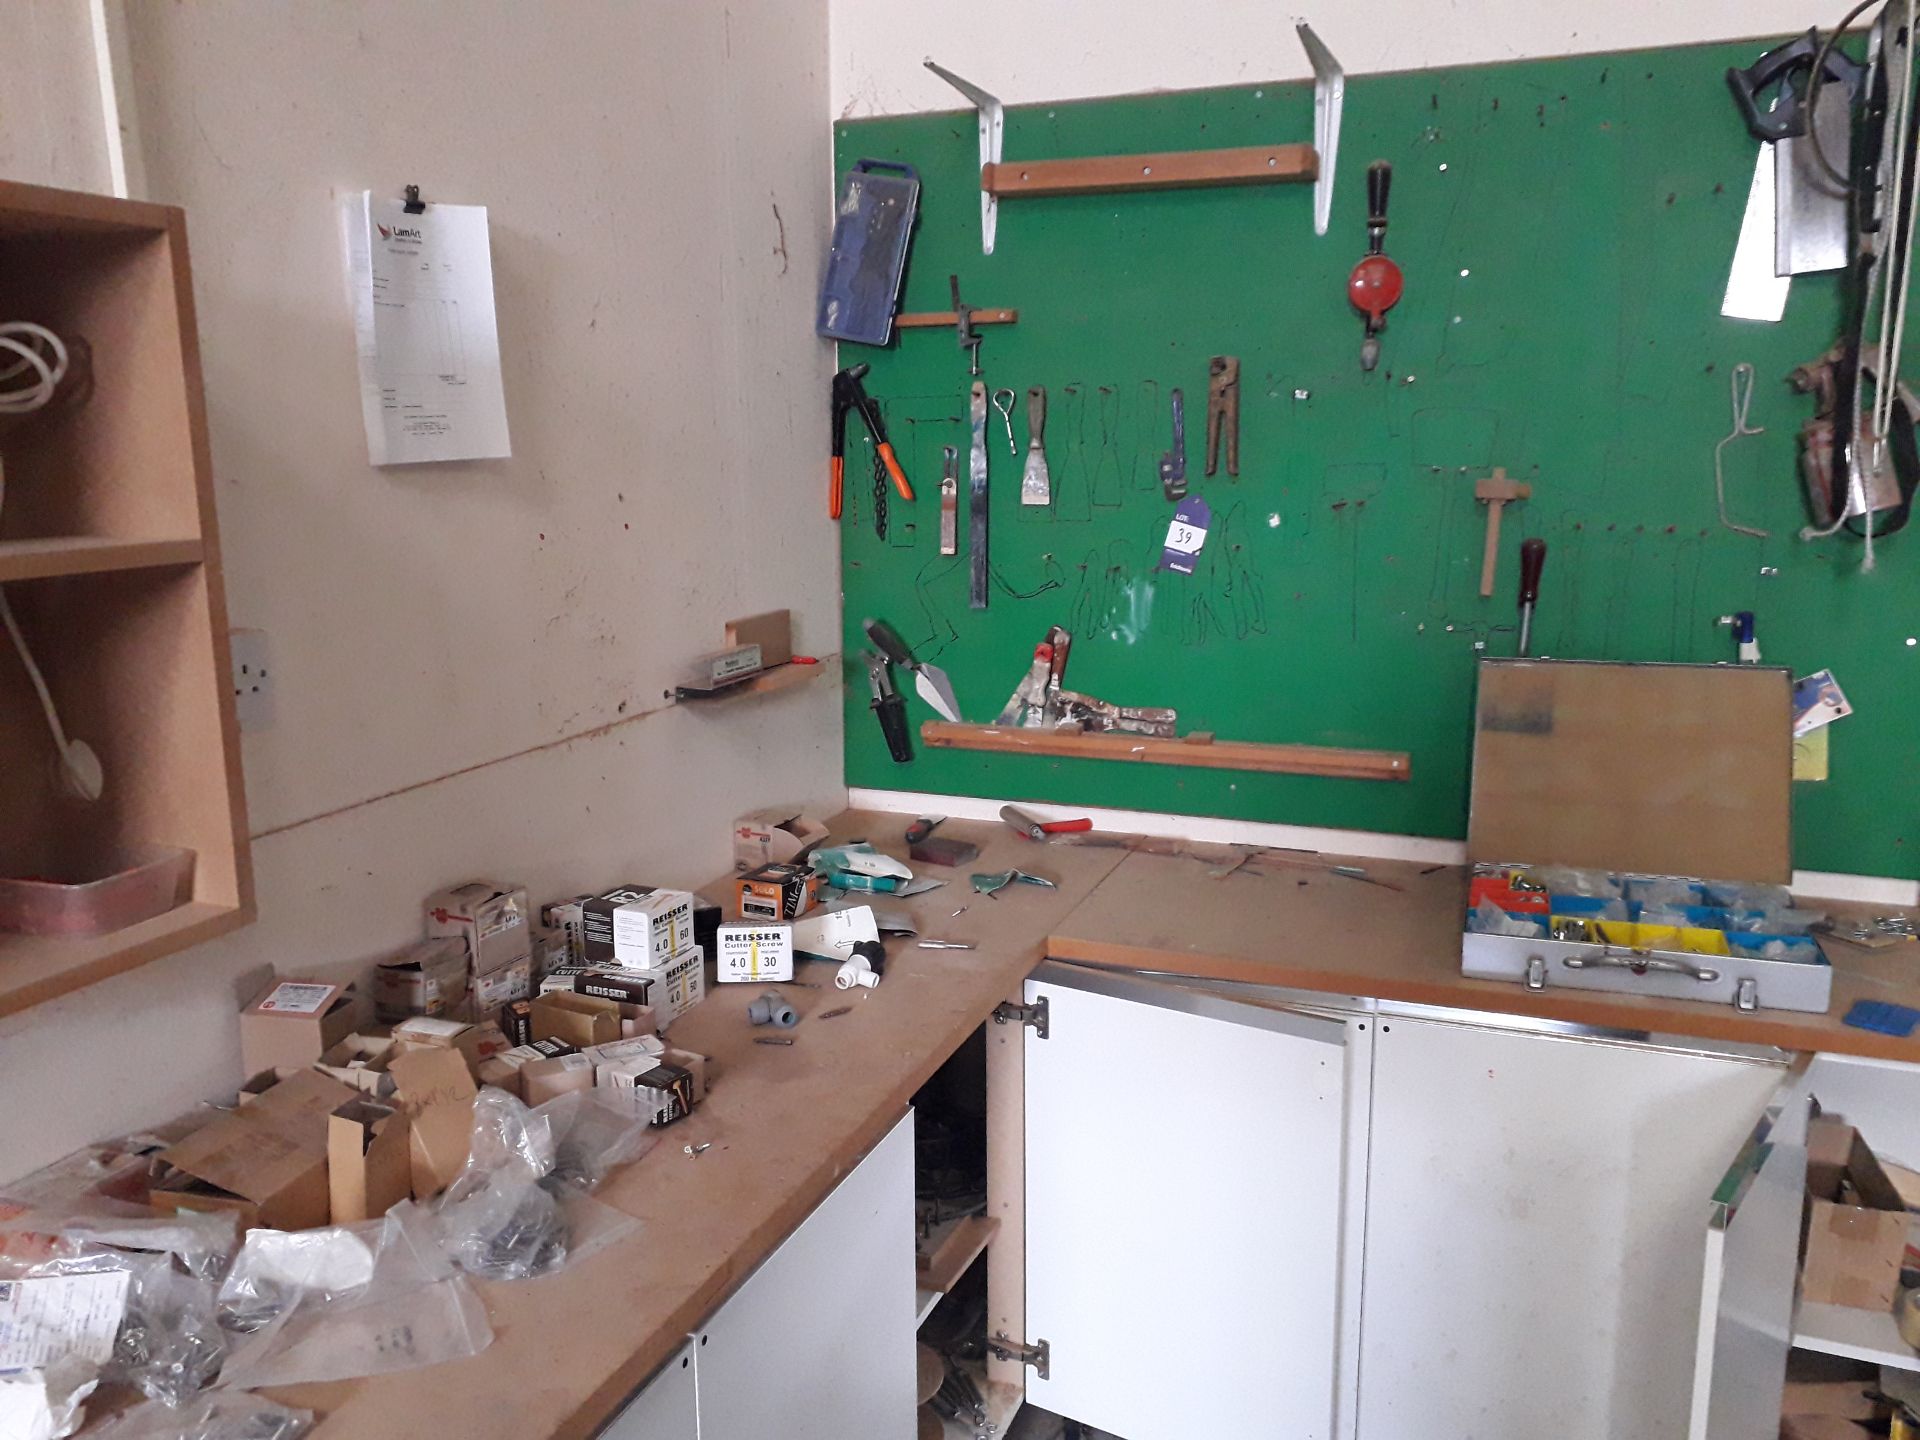 Contents of Wall and Cupboards to include Quantity of Screws, Pins, Drill Bits, Fixings